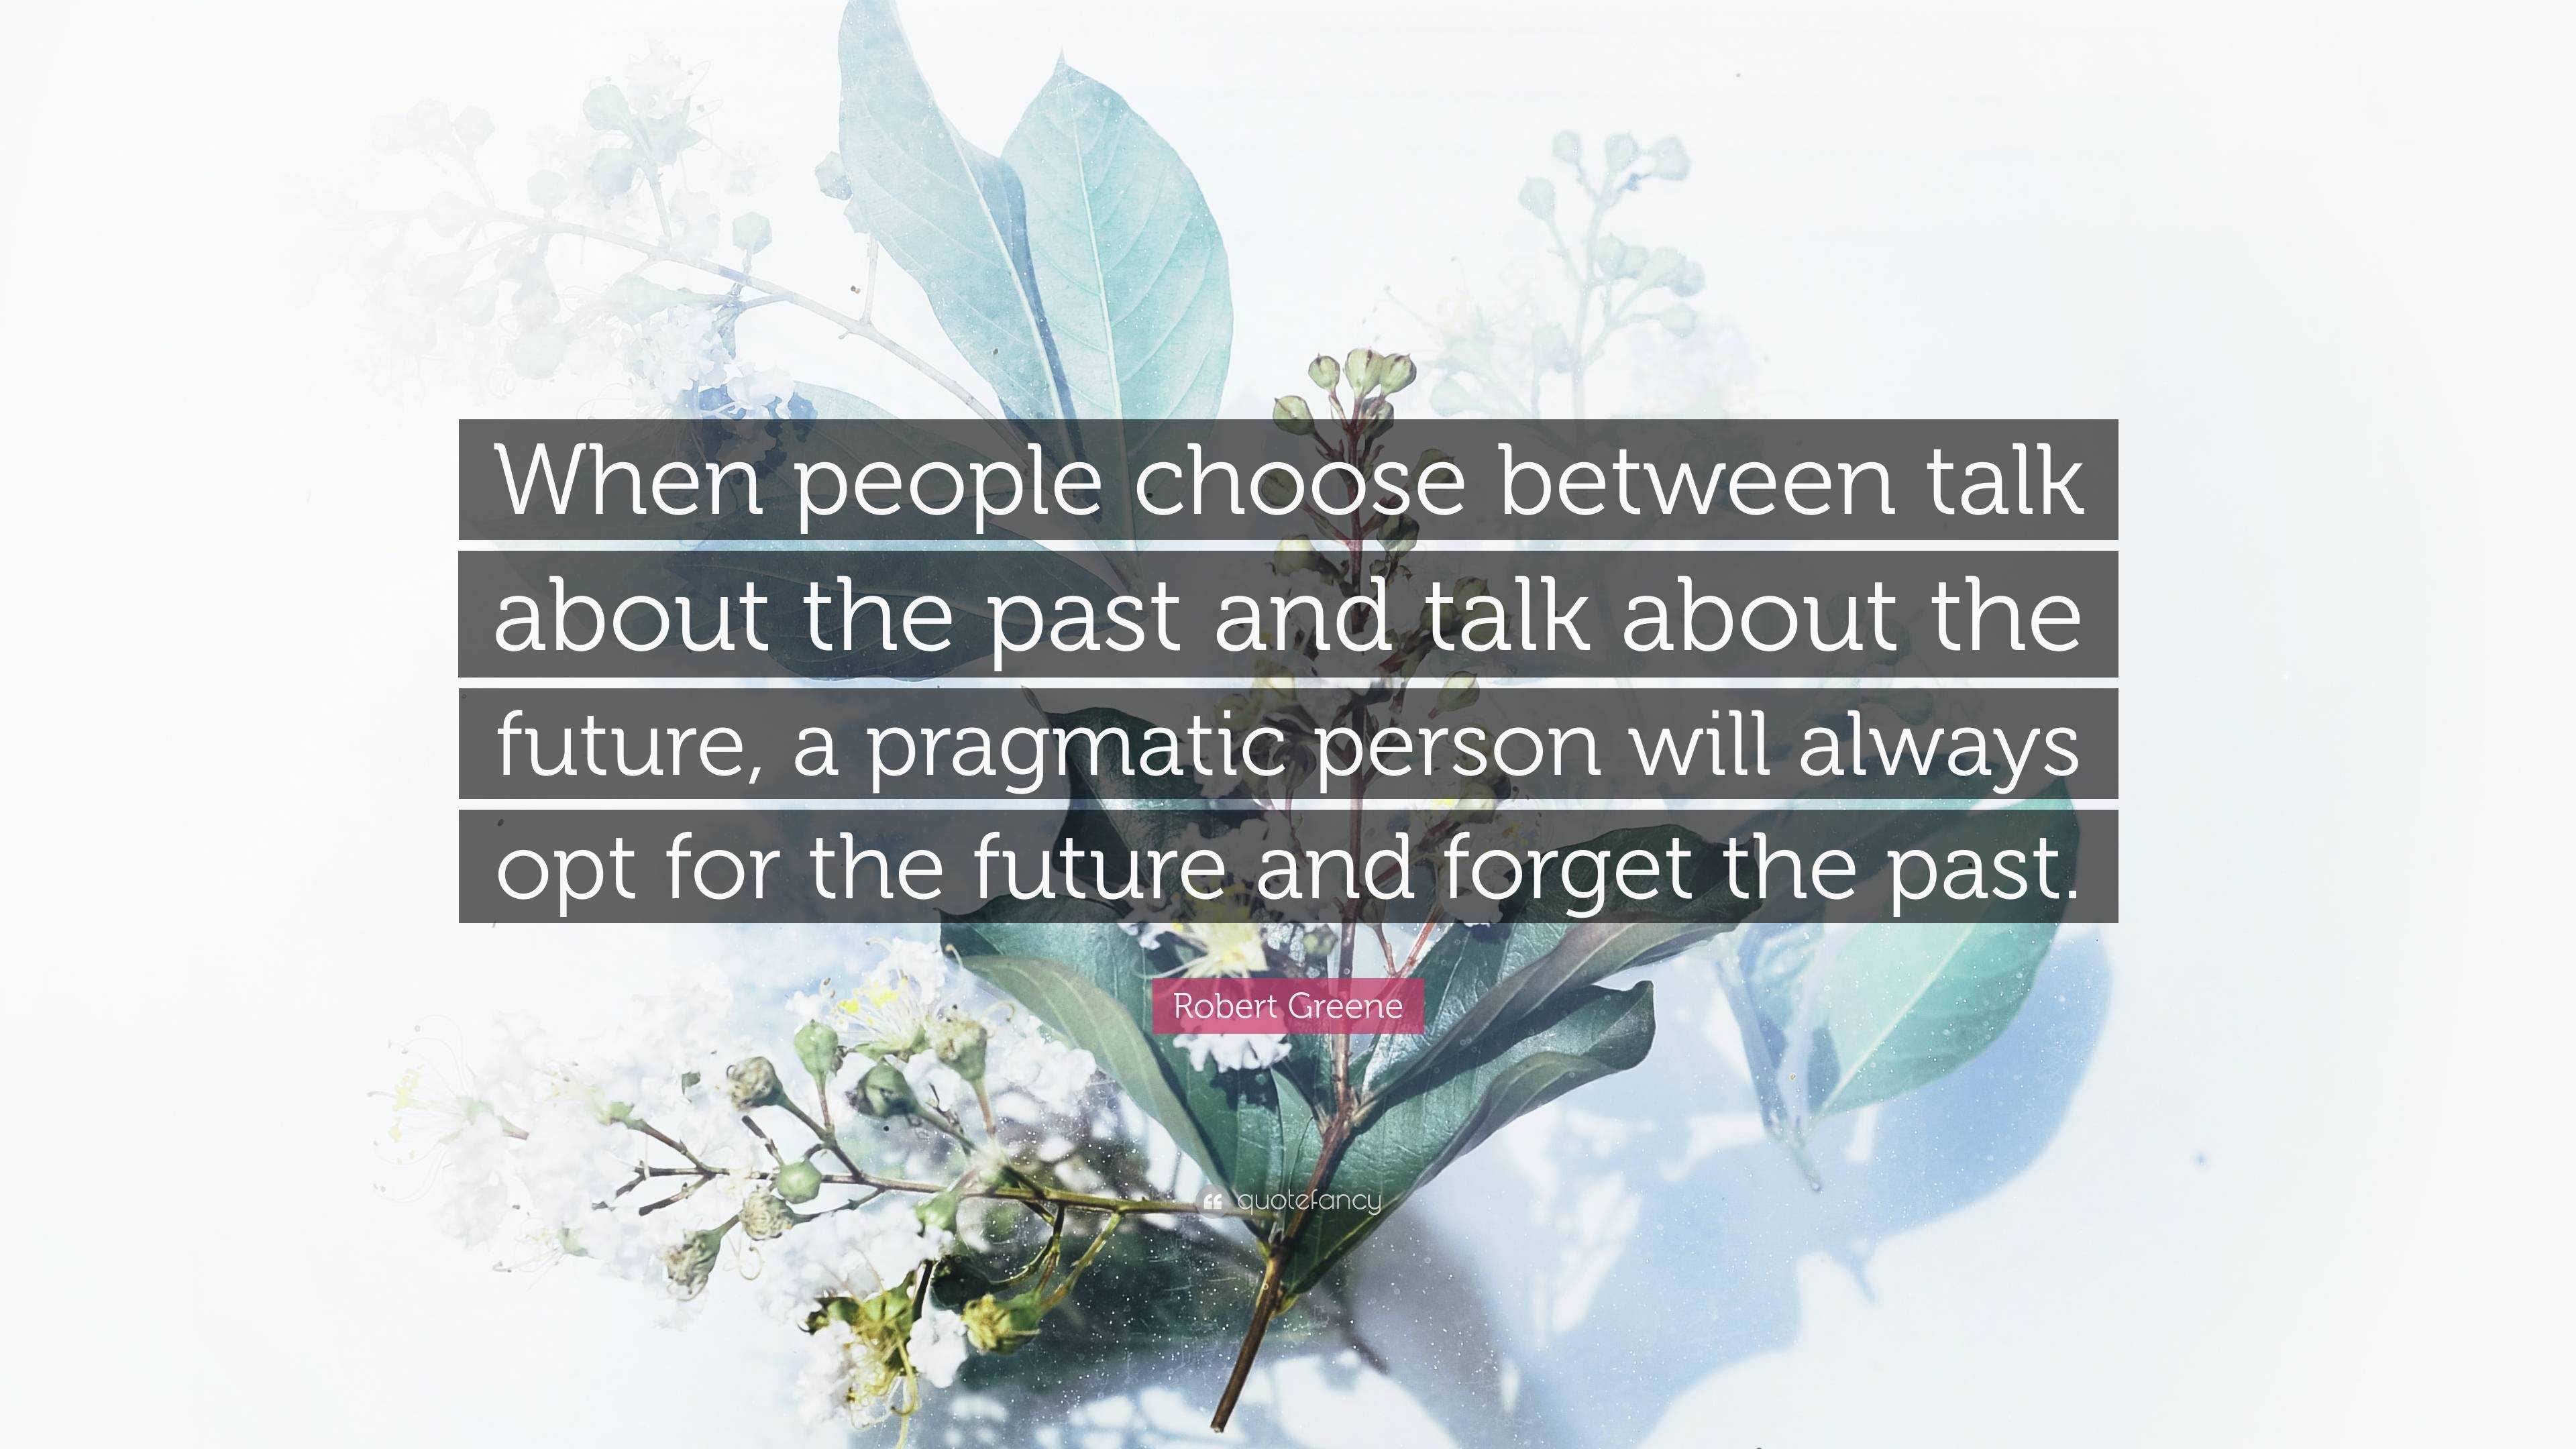 Robert Greene Quote: “When people choose between talk about the past ...